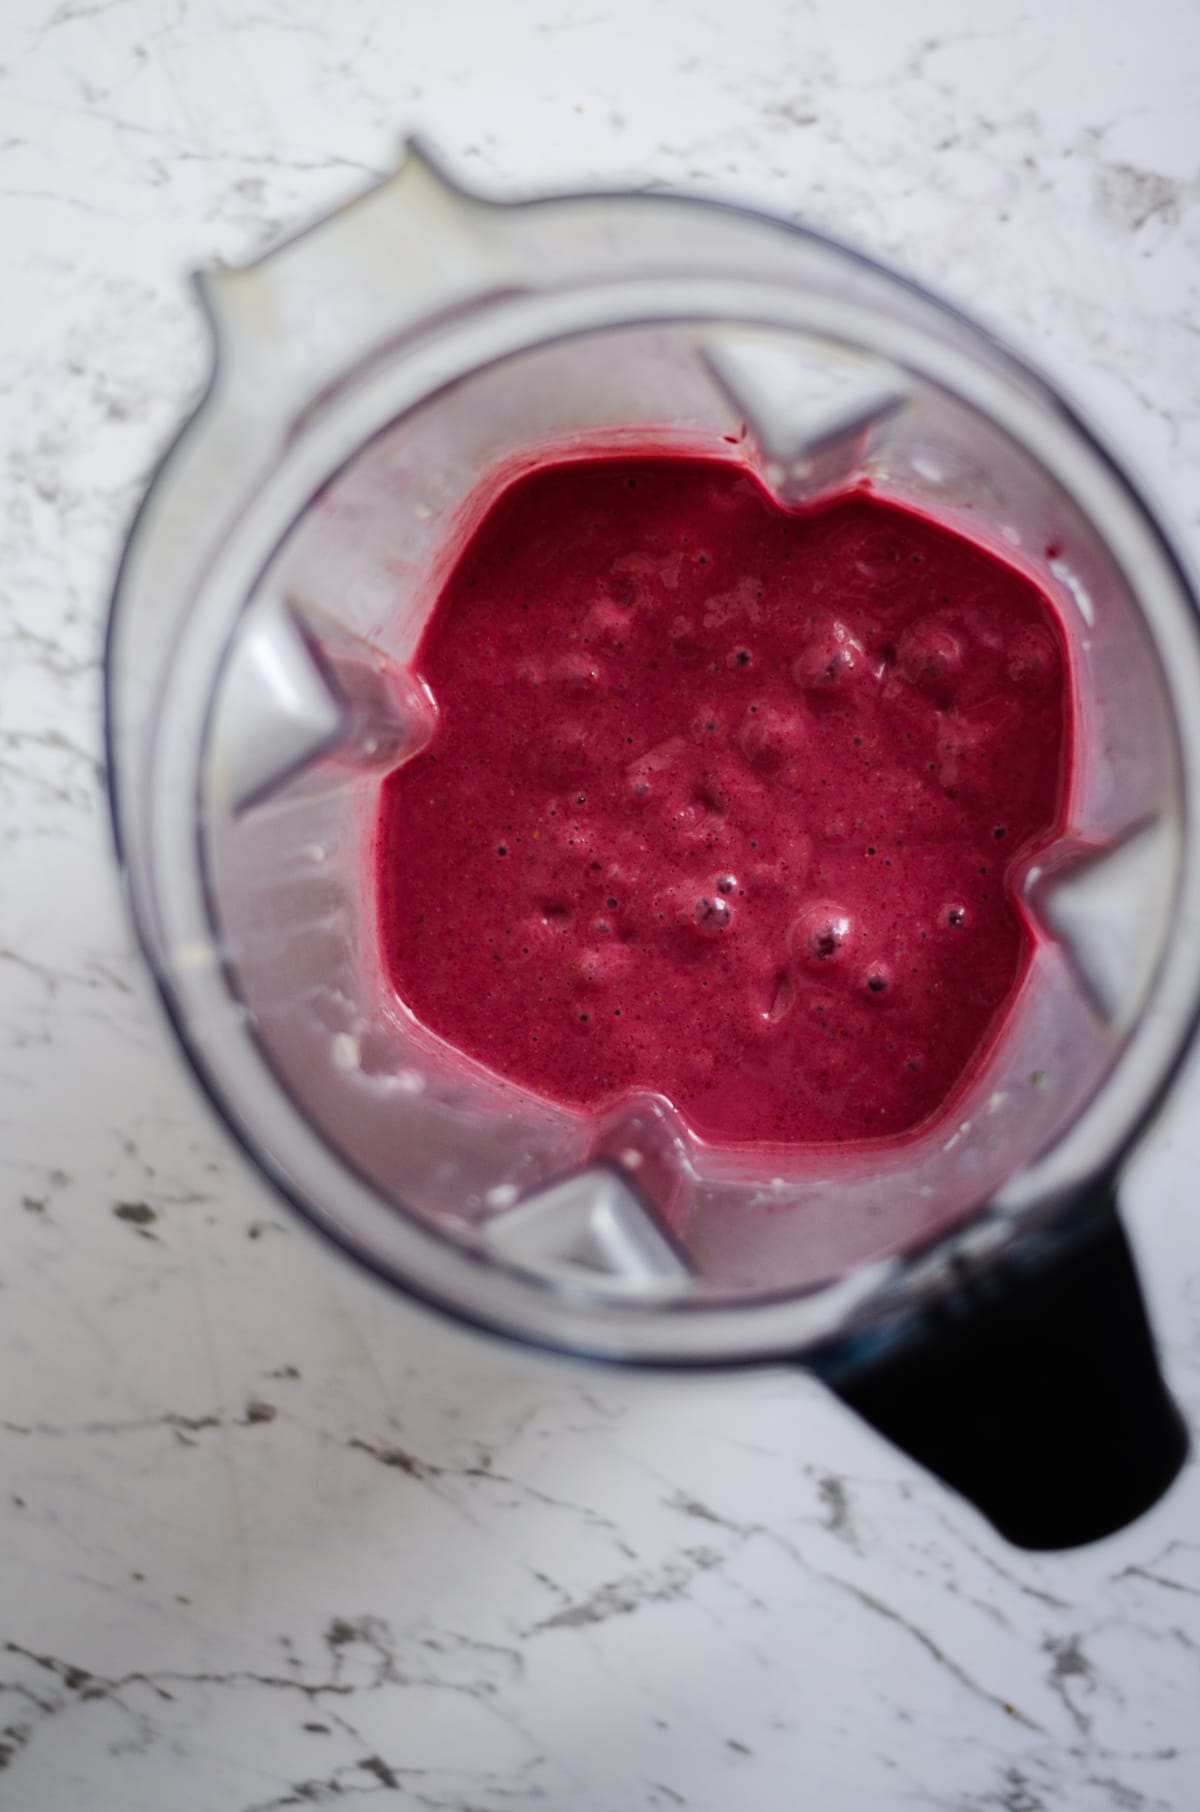 Creamy pink raspberry smoothie in a vitamix blender container.